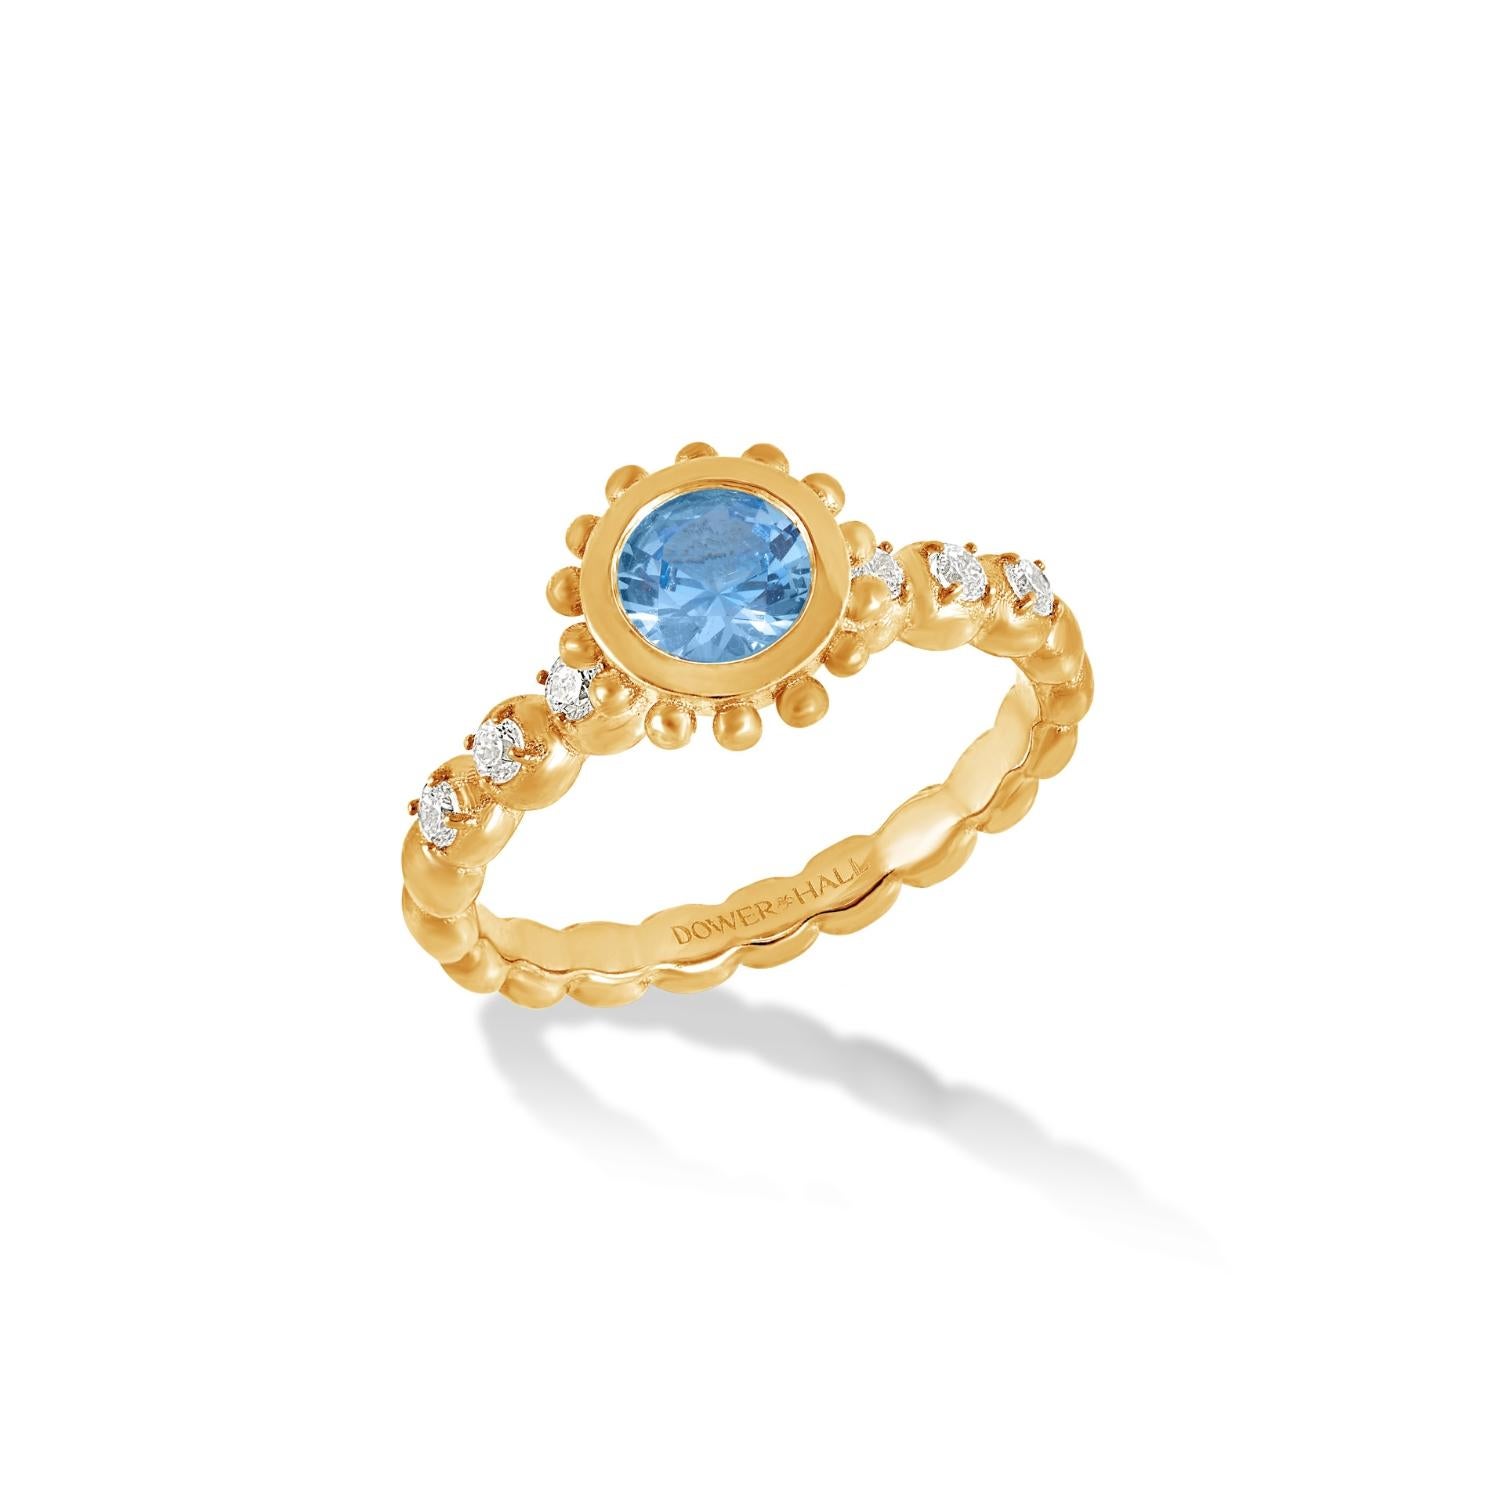 This striking ring is set with a faceted round Blue Topaz in 14k yellow gold featuring granulated balls around the outside of the rub-over setting and with diamonds claw set in the dotty style band. Inspired by creatures of the coral reef, this